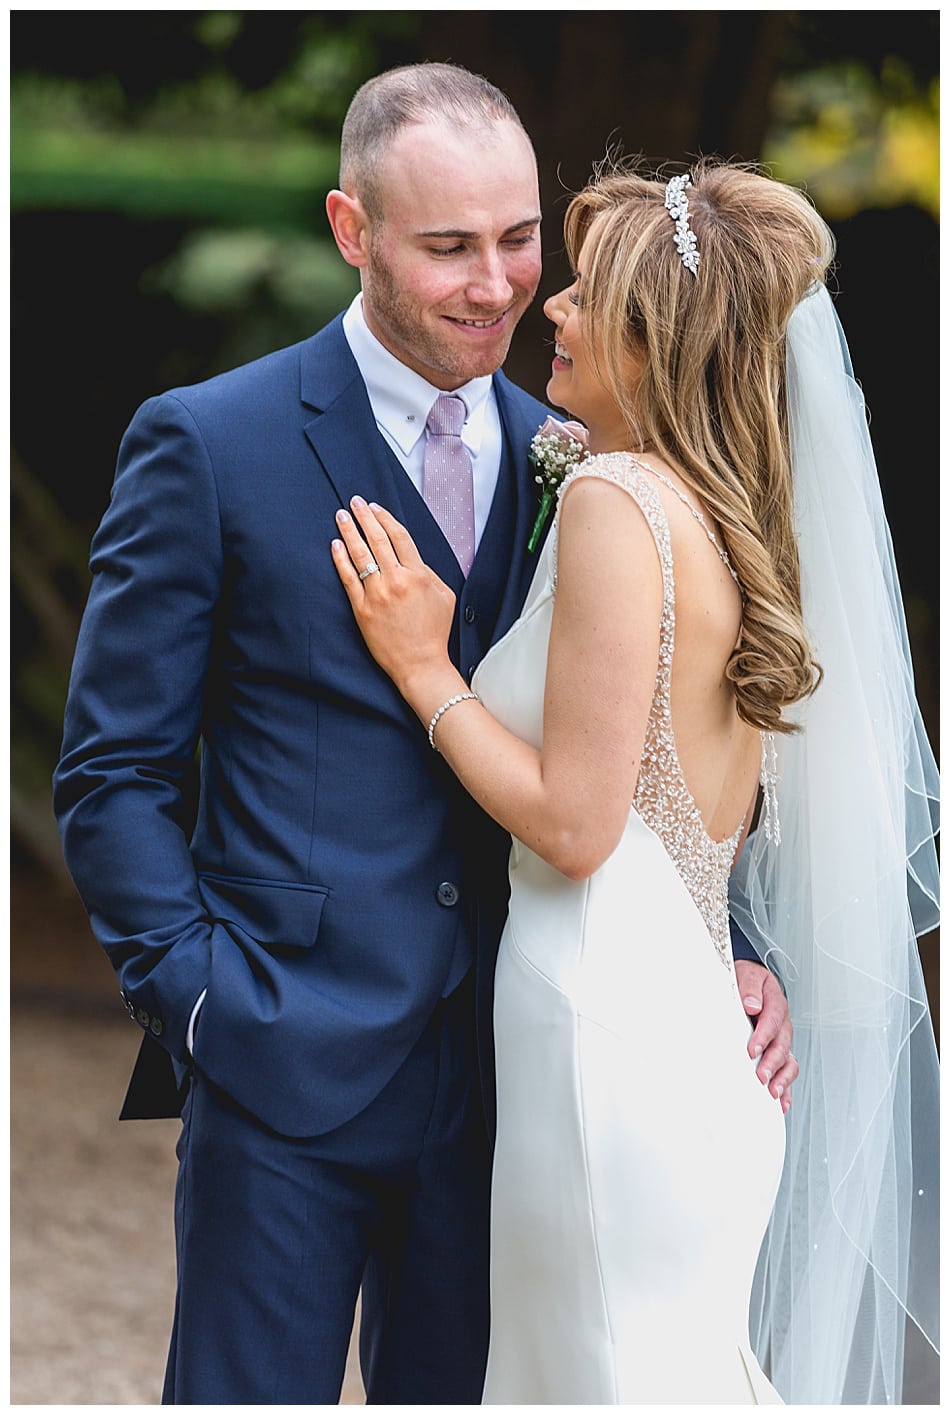 natural wedding photography; Bride and Groom laughing 